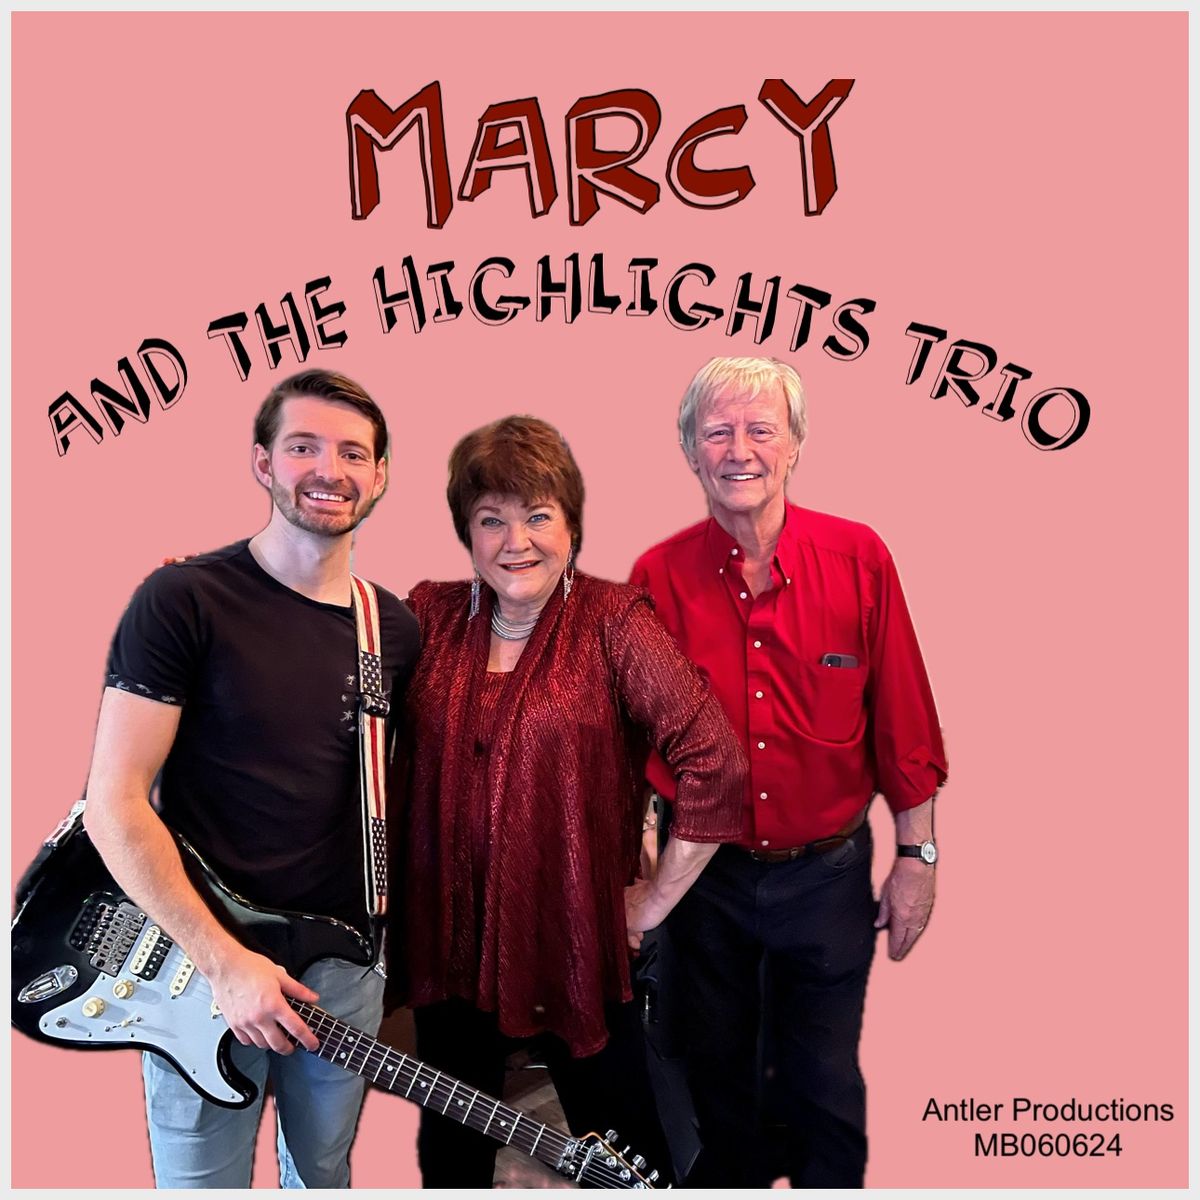 Marcy and the Highlights Trio